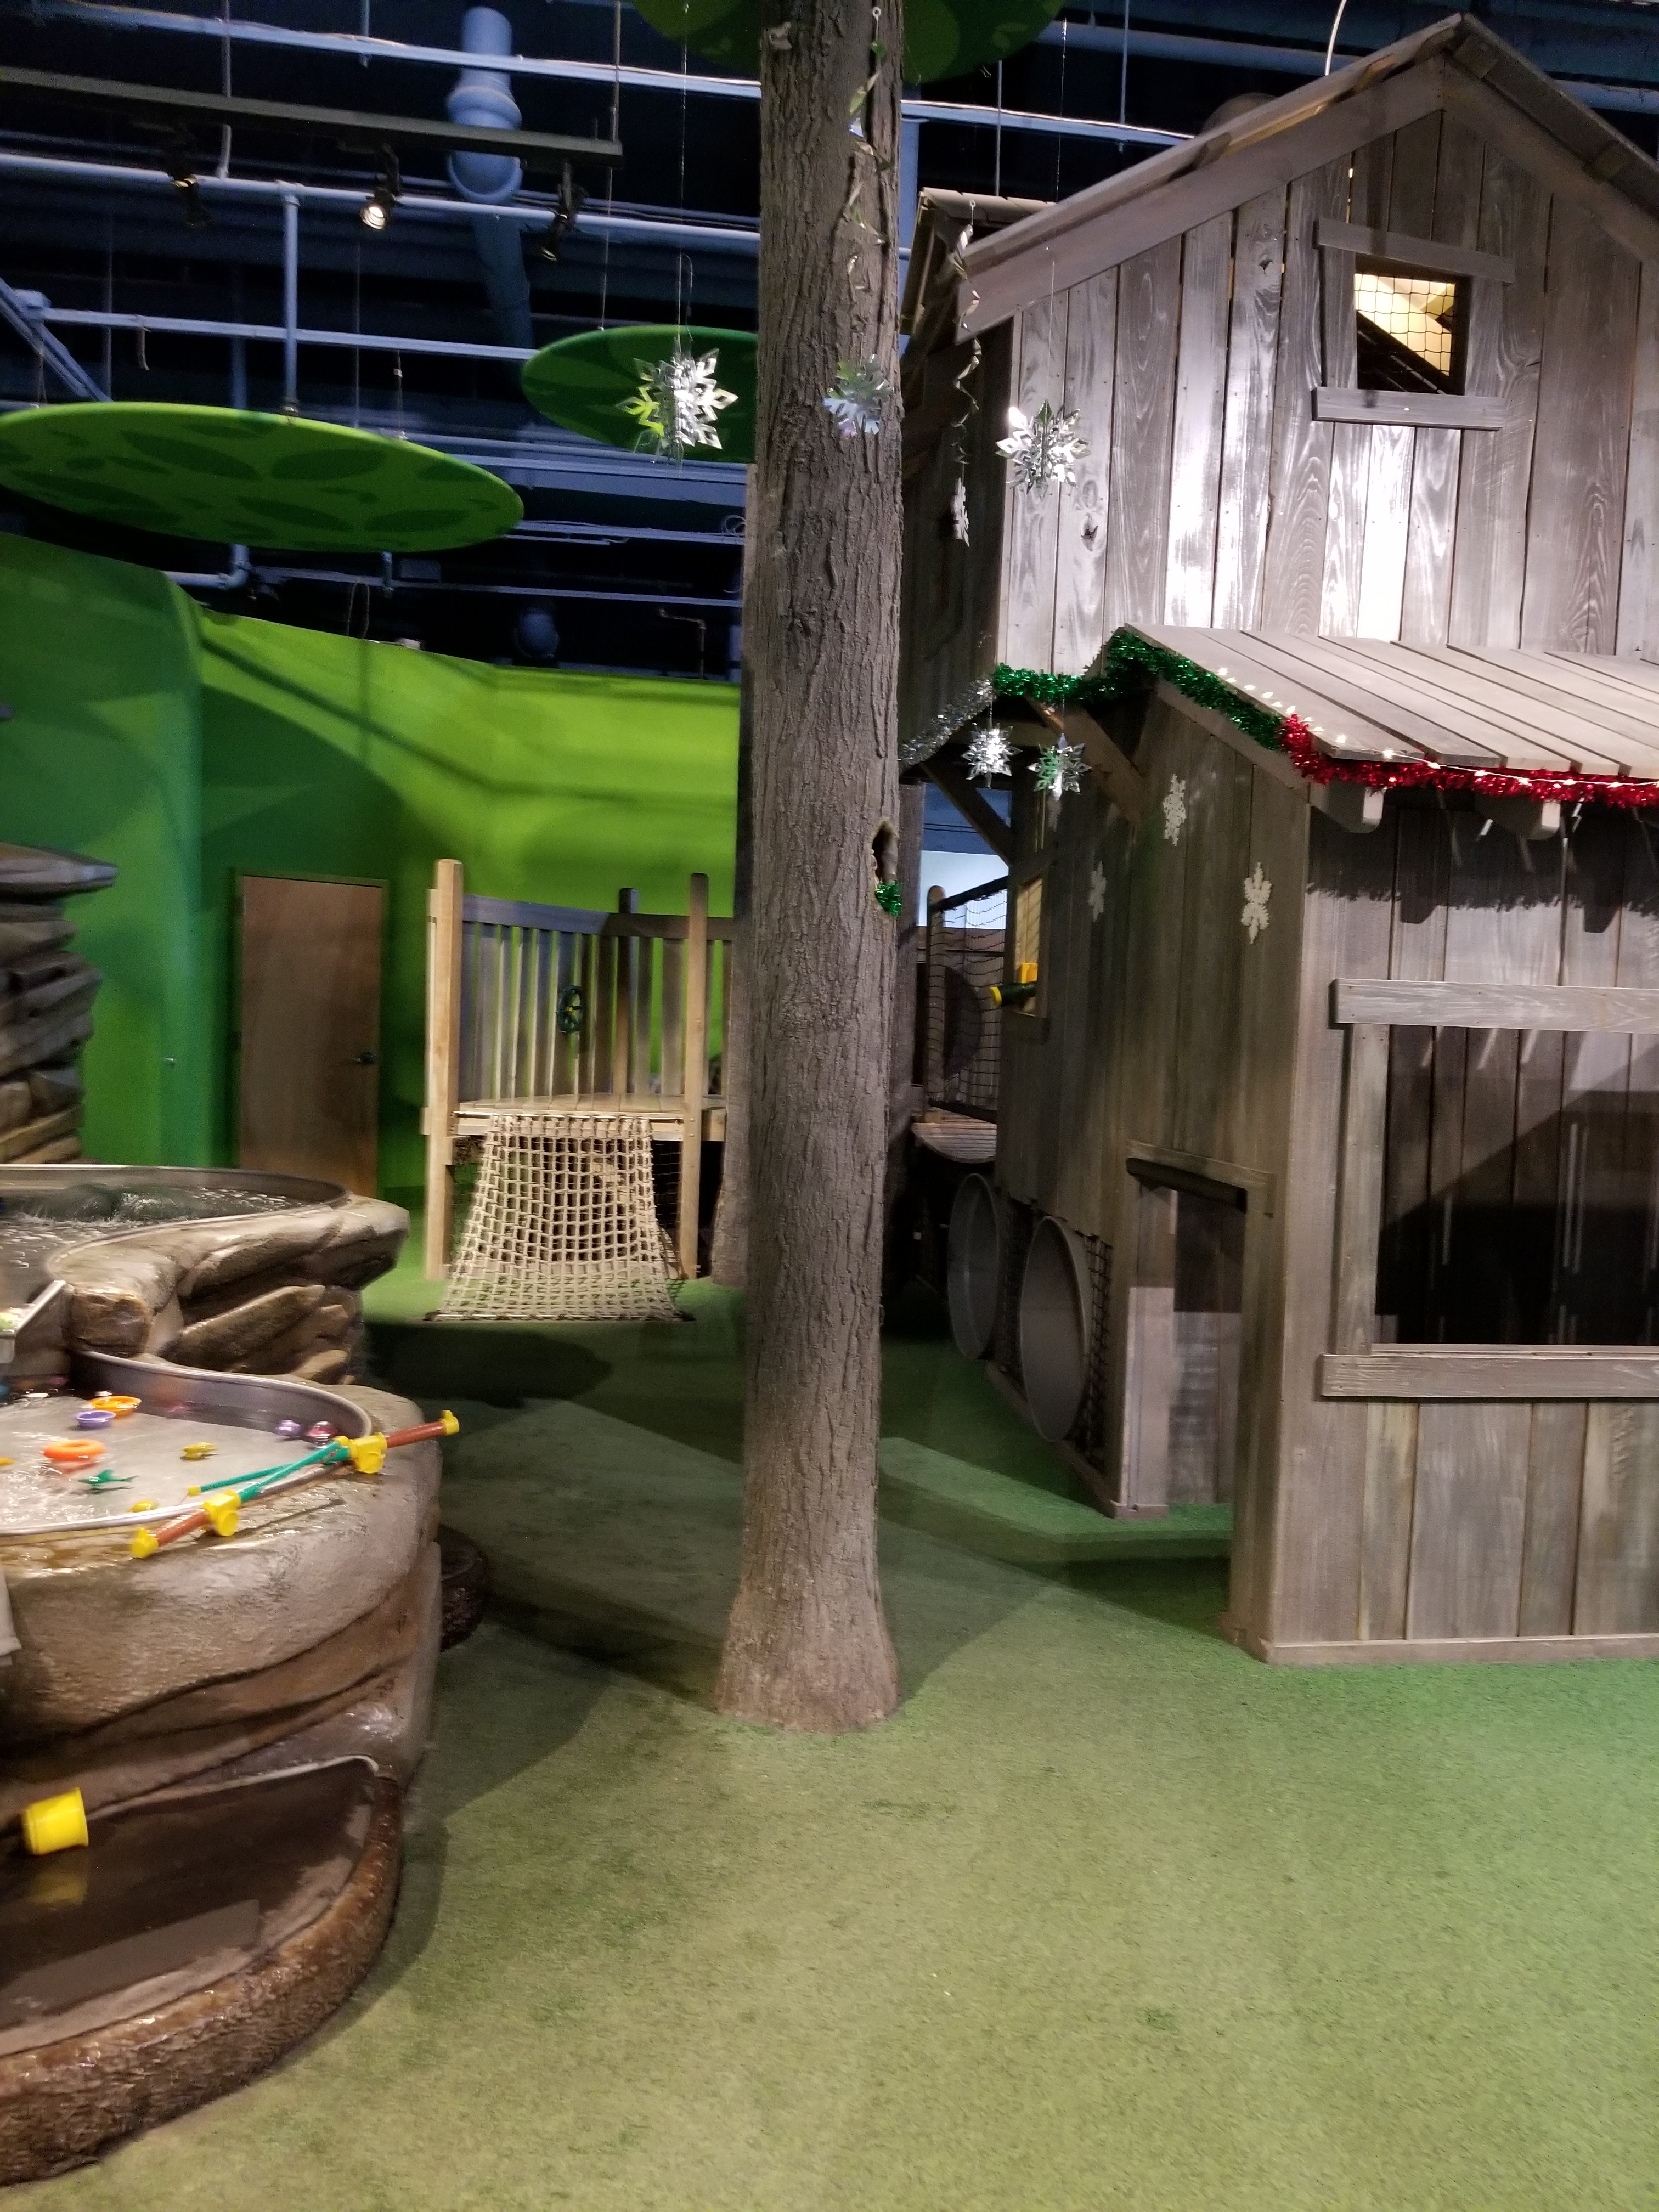 Vivienne's favorite area at the Children's Museum was the tree house 